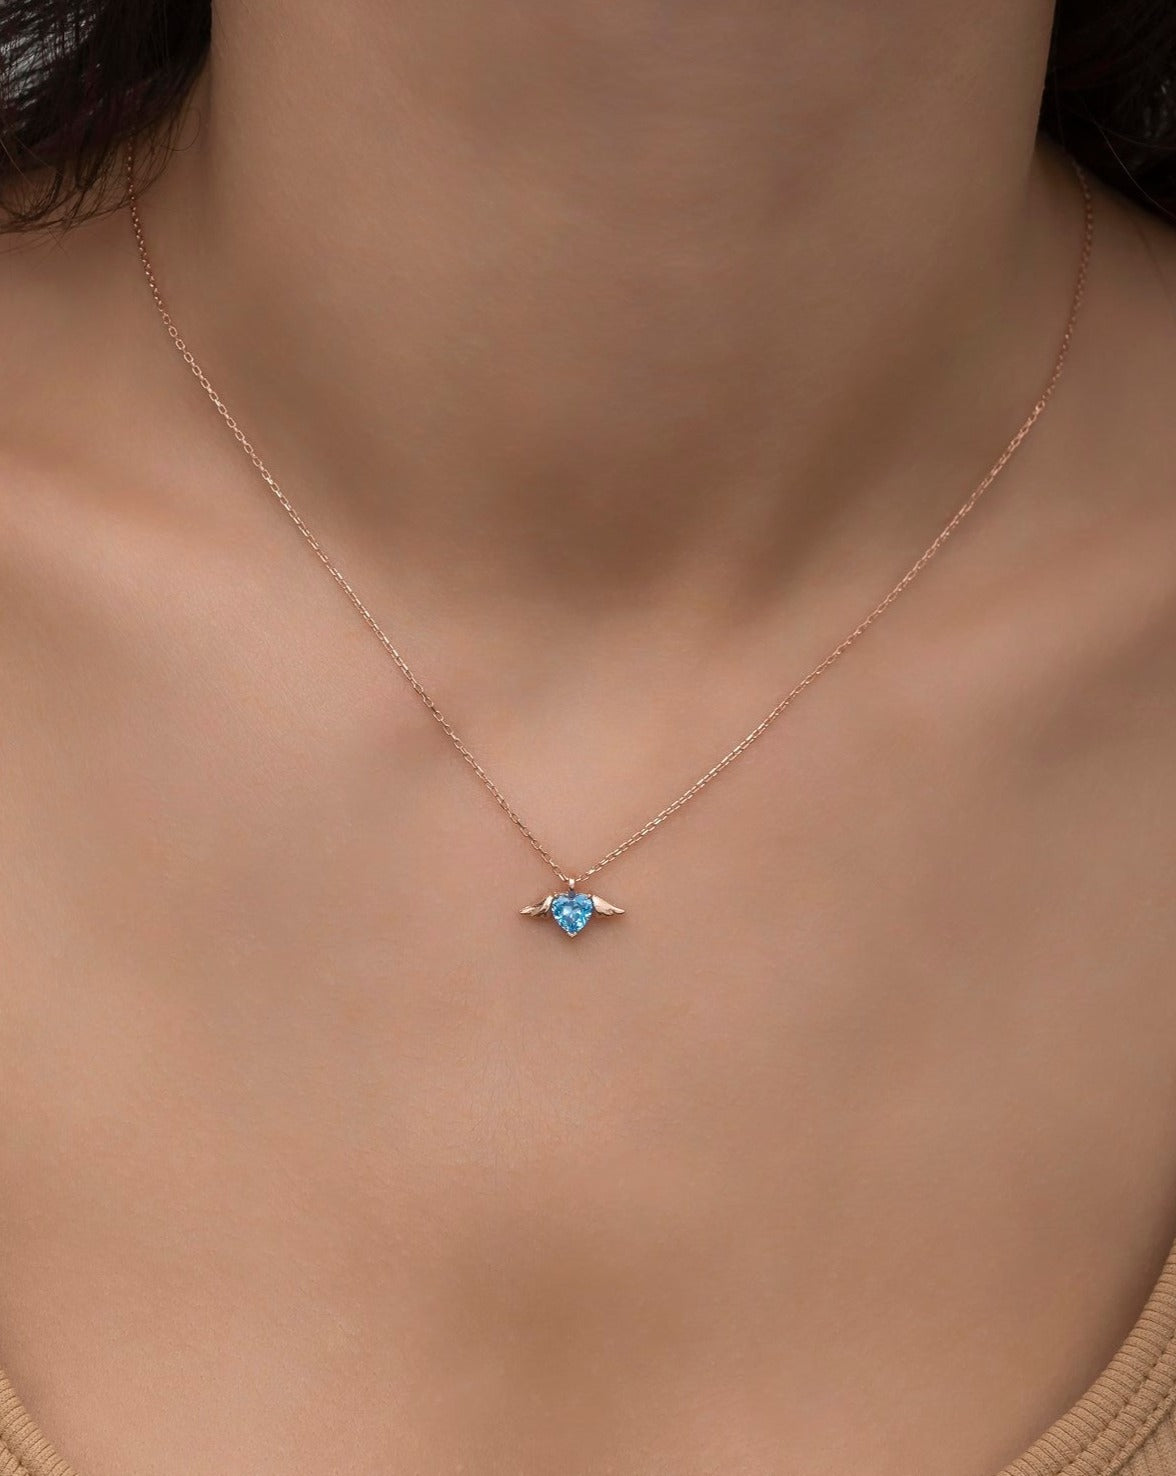 Winged flying heart necklace